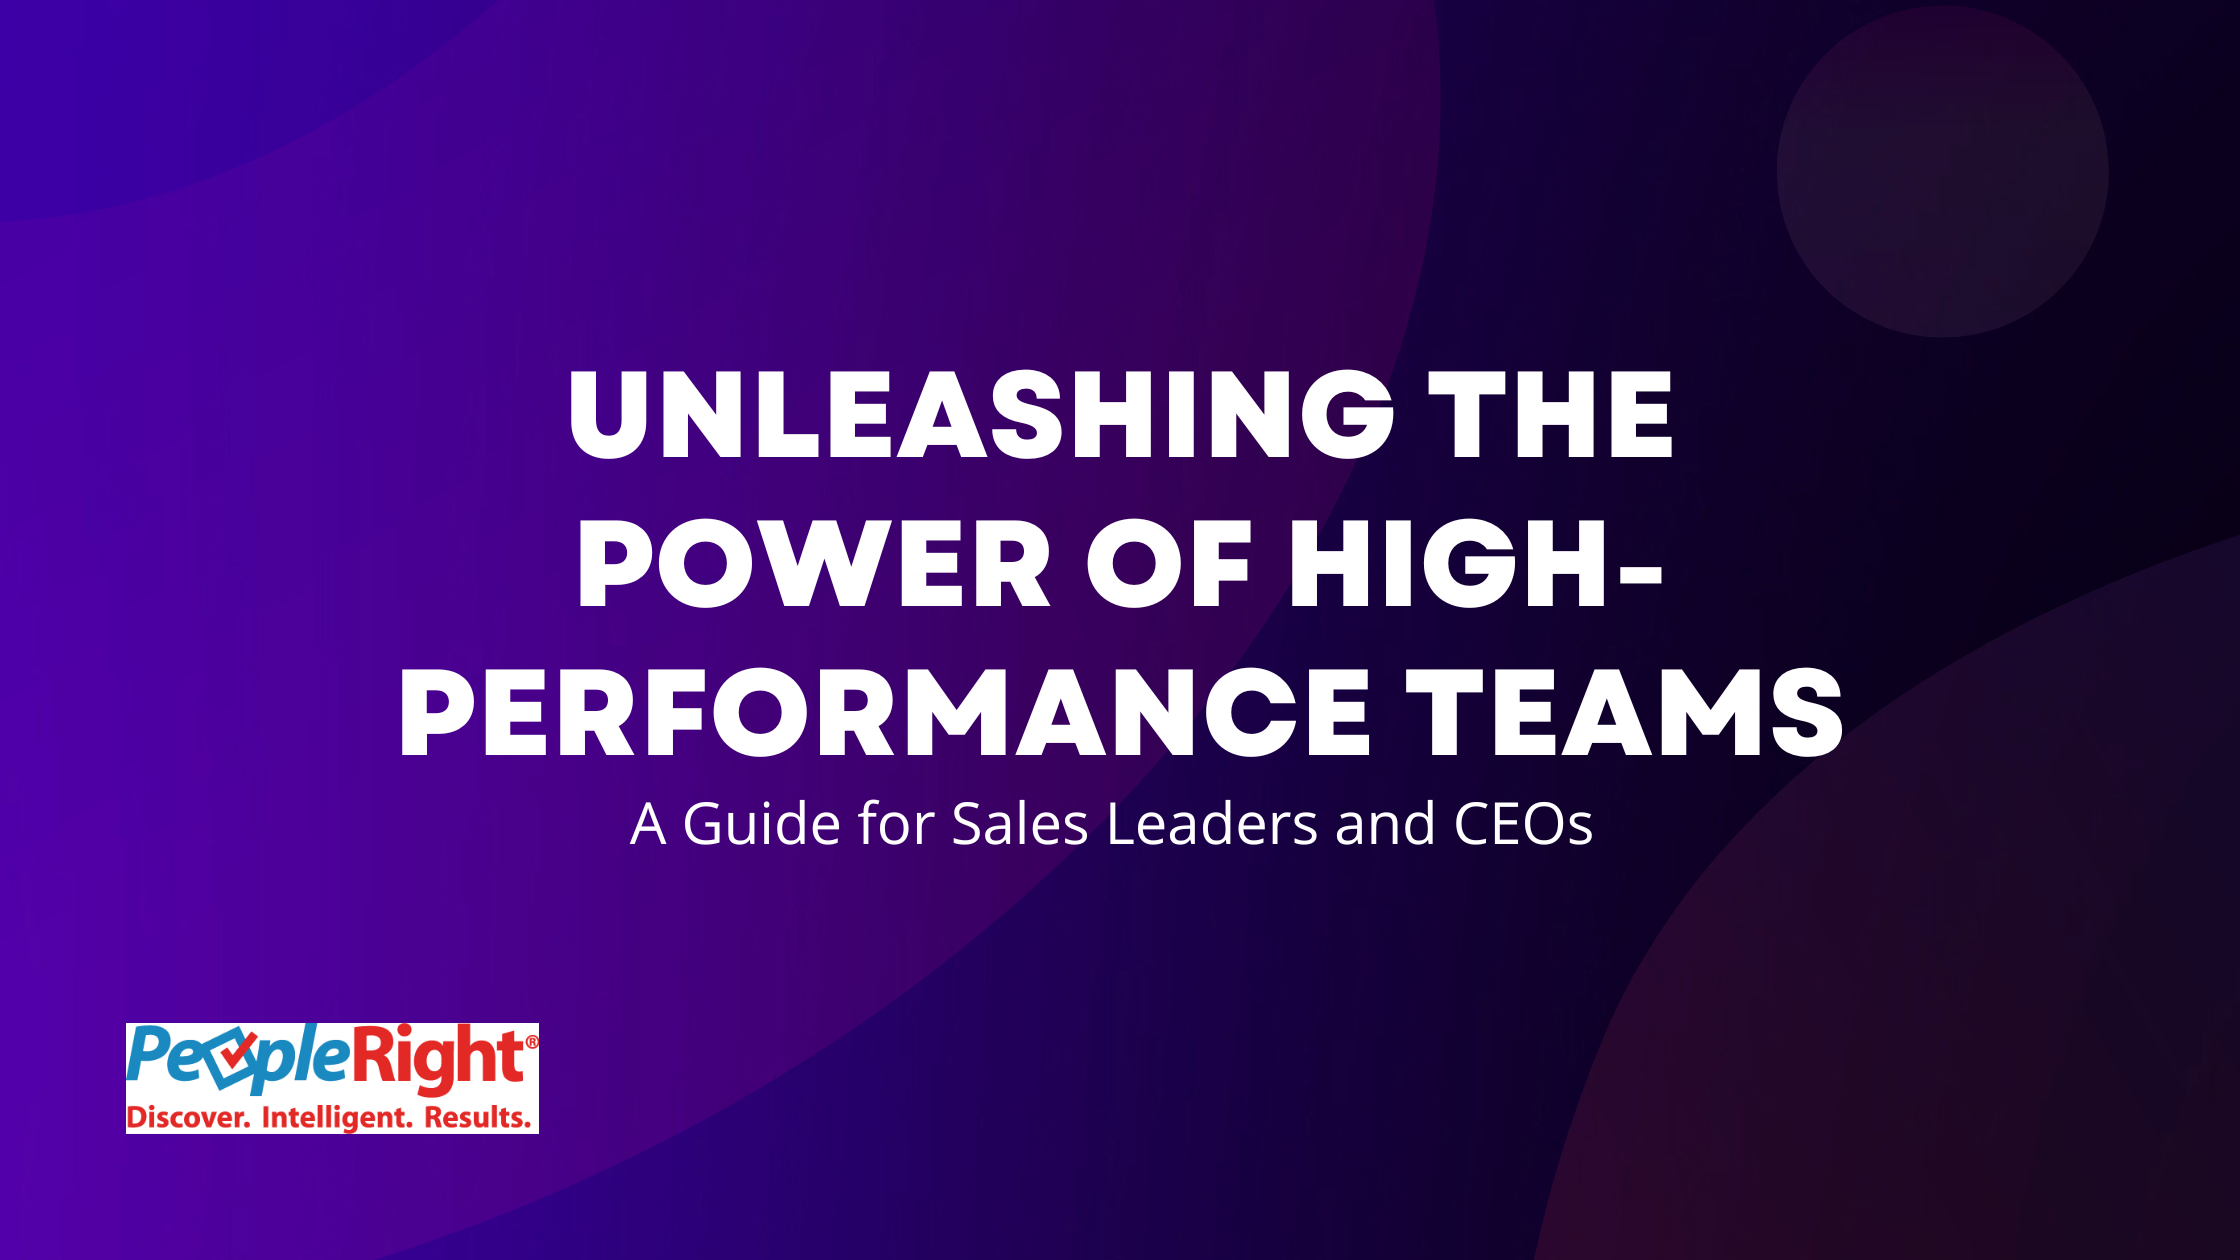 Unleashing the Power of High-Performance Teams: A Guide for Sales Leaders and CEOs